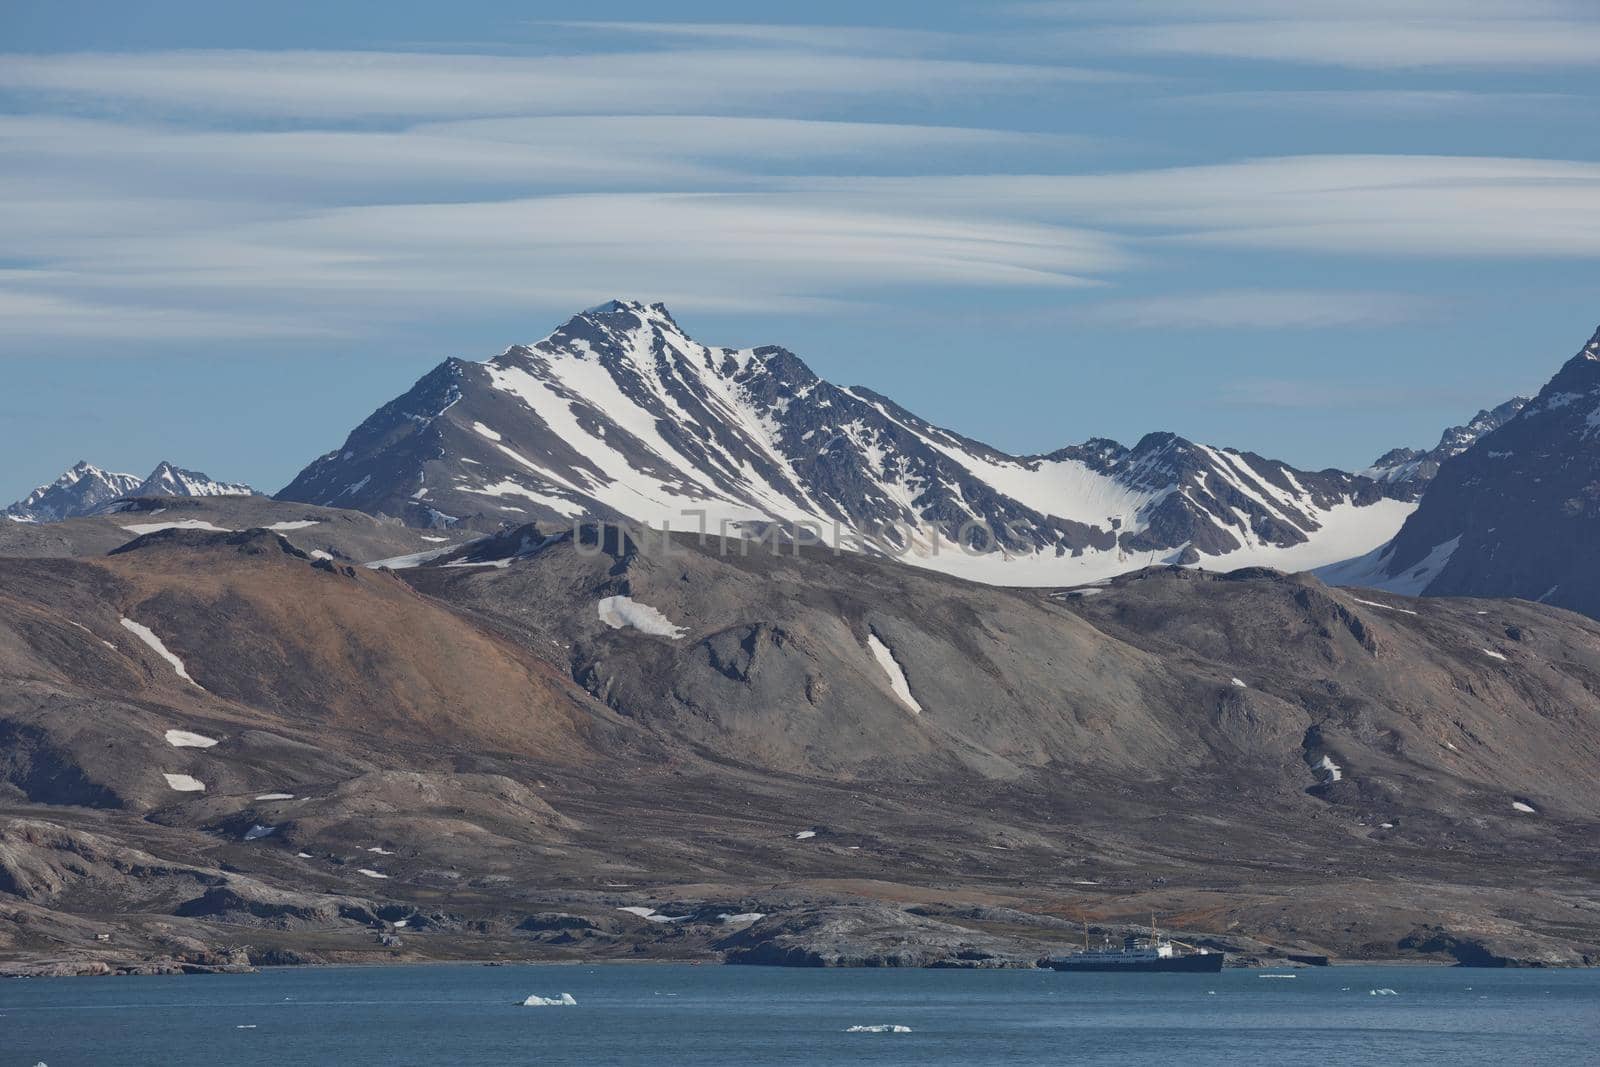 Mountains, glaciers and coastline landscape close to a village called "Ny-Ålesund" located at 79 degree North on Spitsbergen by wondry